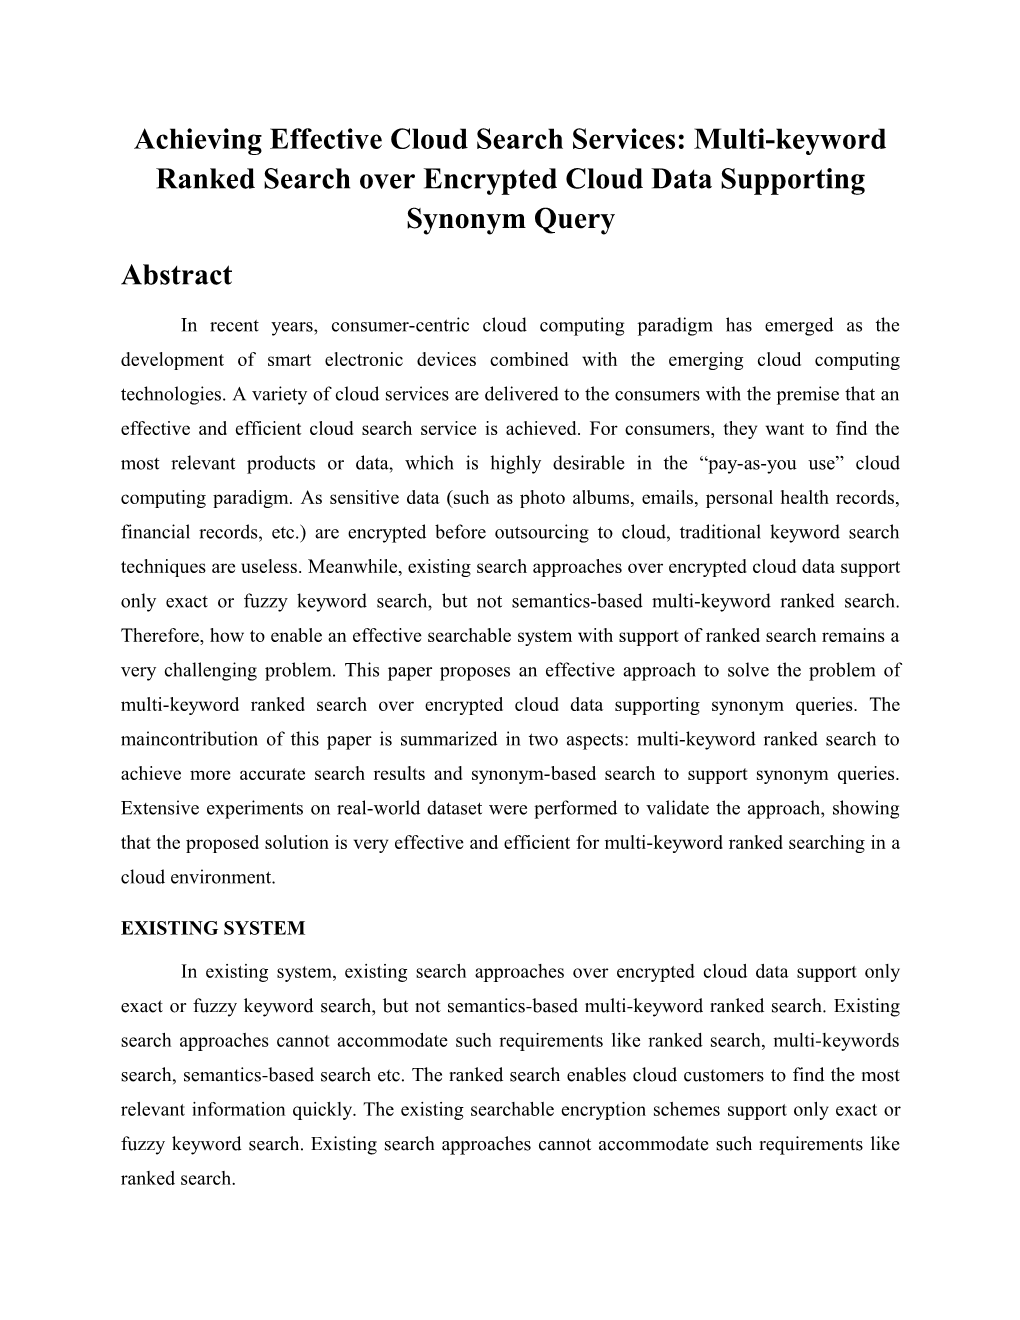 Achieving Effective Cloud Search Services: Multi-Keyword Ranked Search Over Encrypted